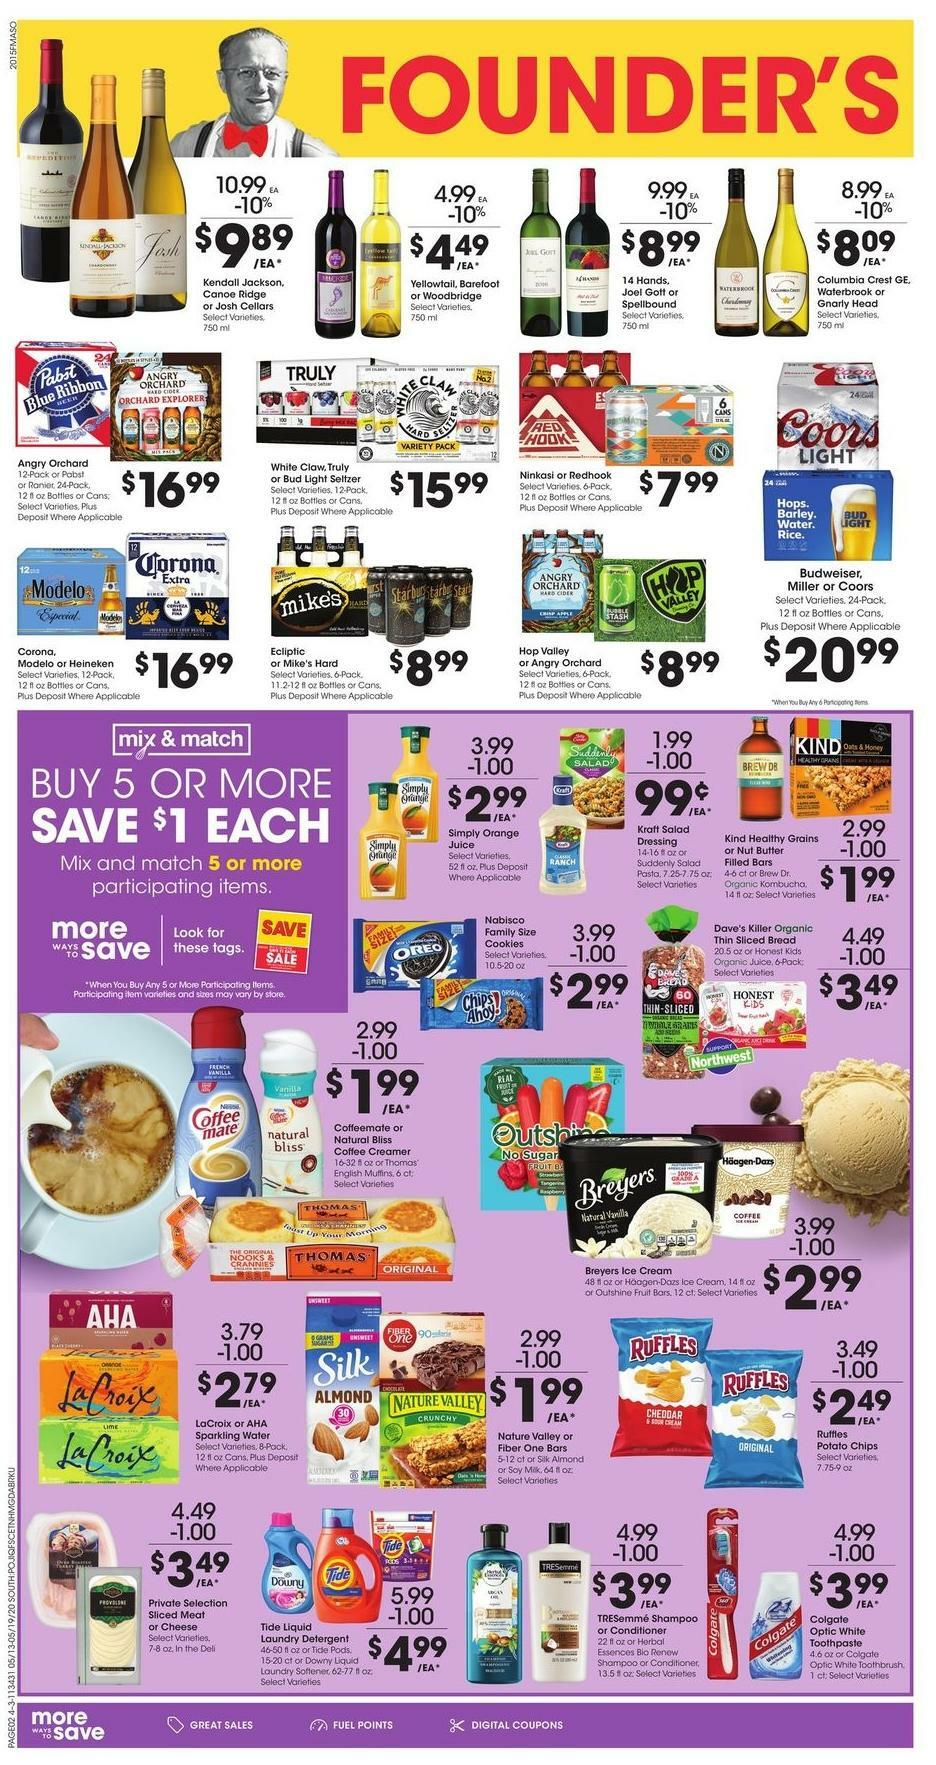 Fred Meyer Founder's Day Sale Weekly Ad from May 13